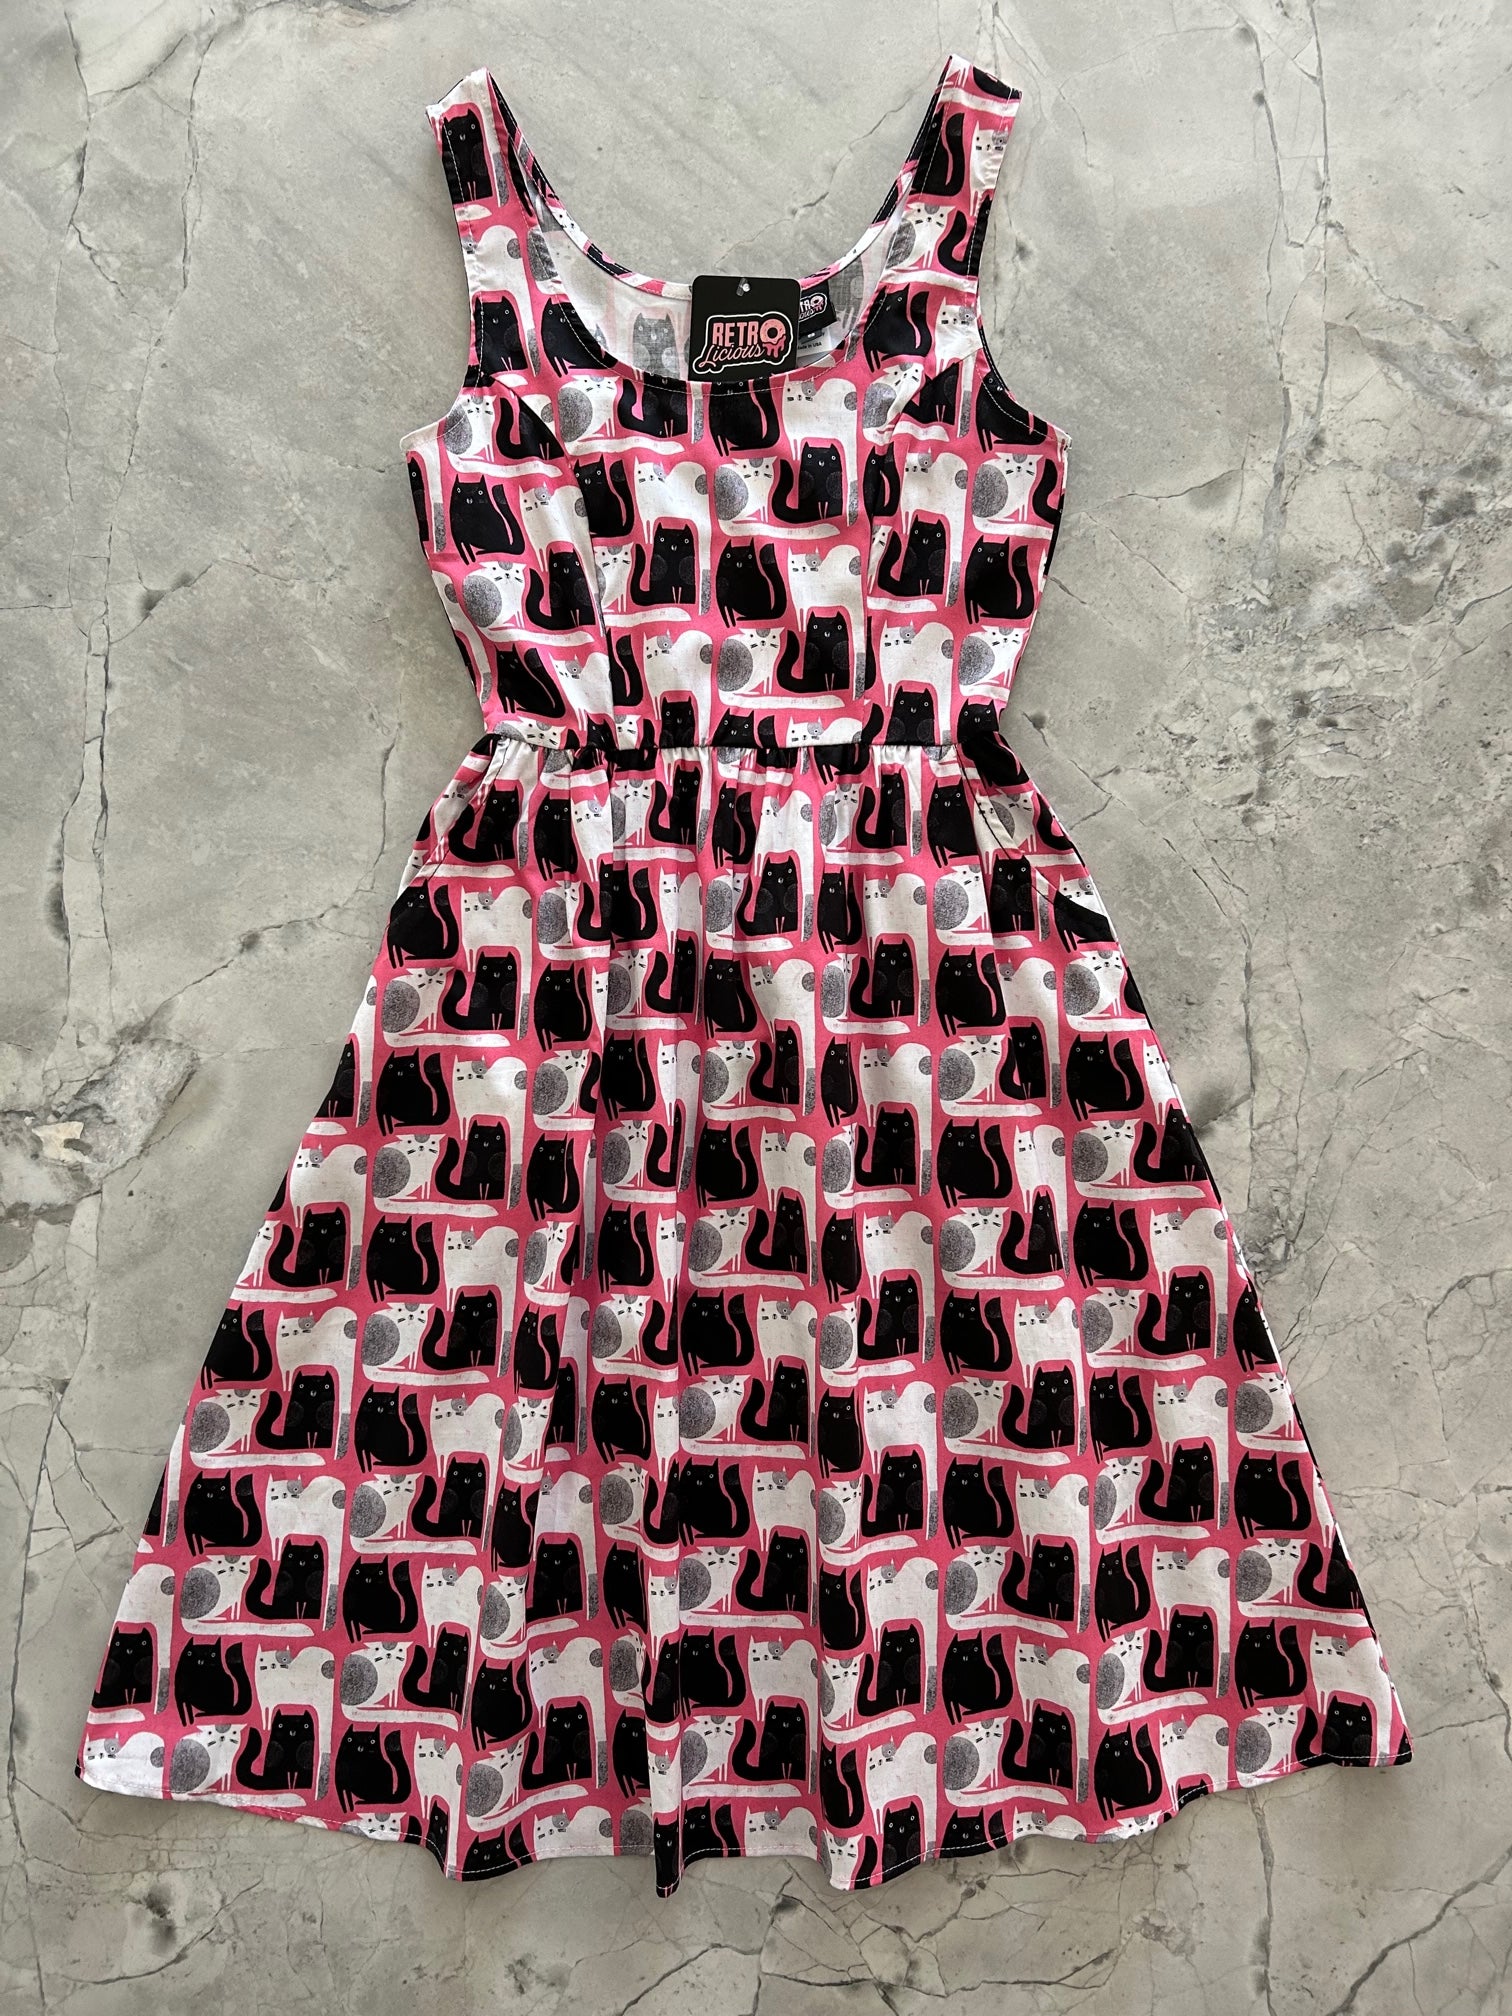 Kitty Dress  Vintage dresses, Fit n flare dress, Fashion clothes